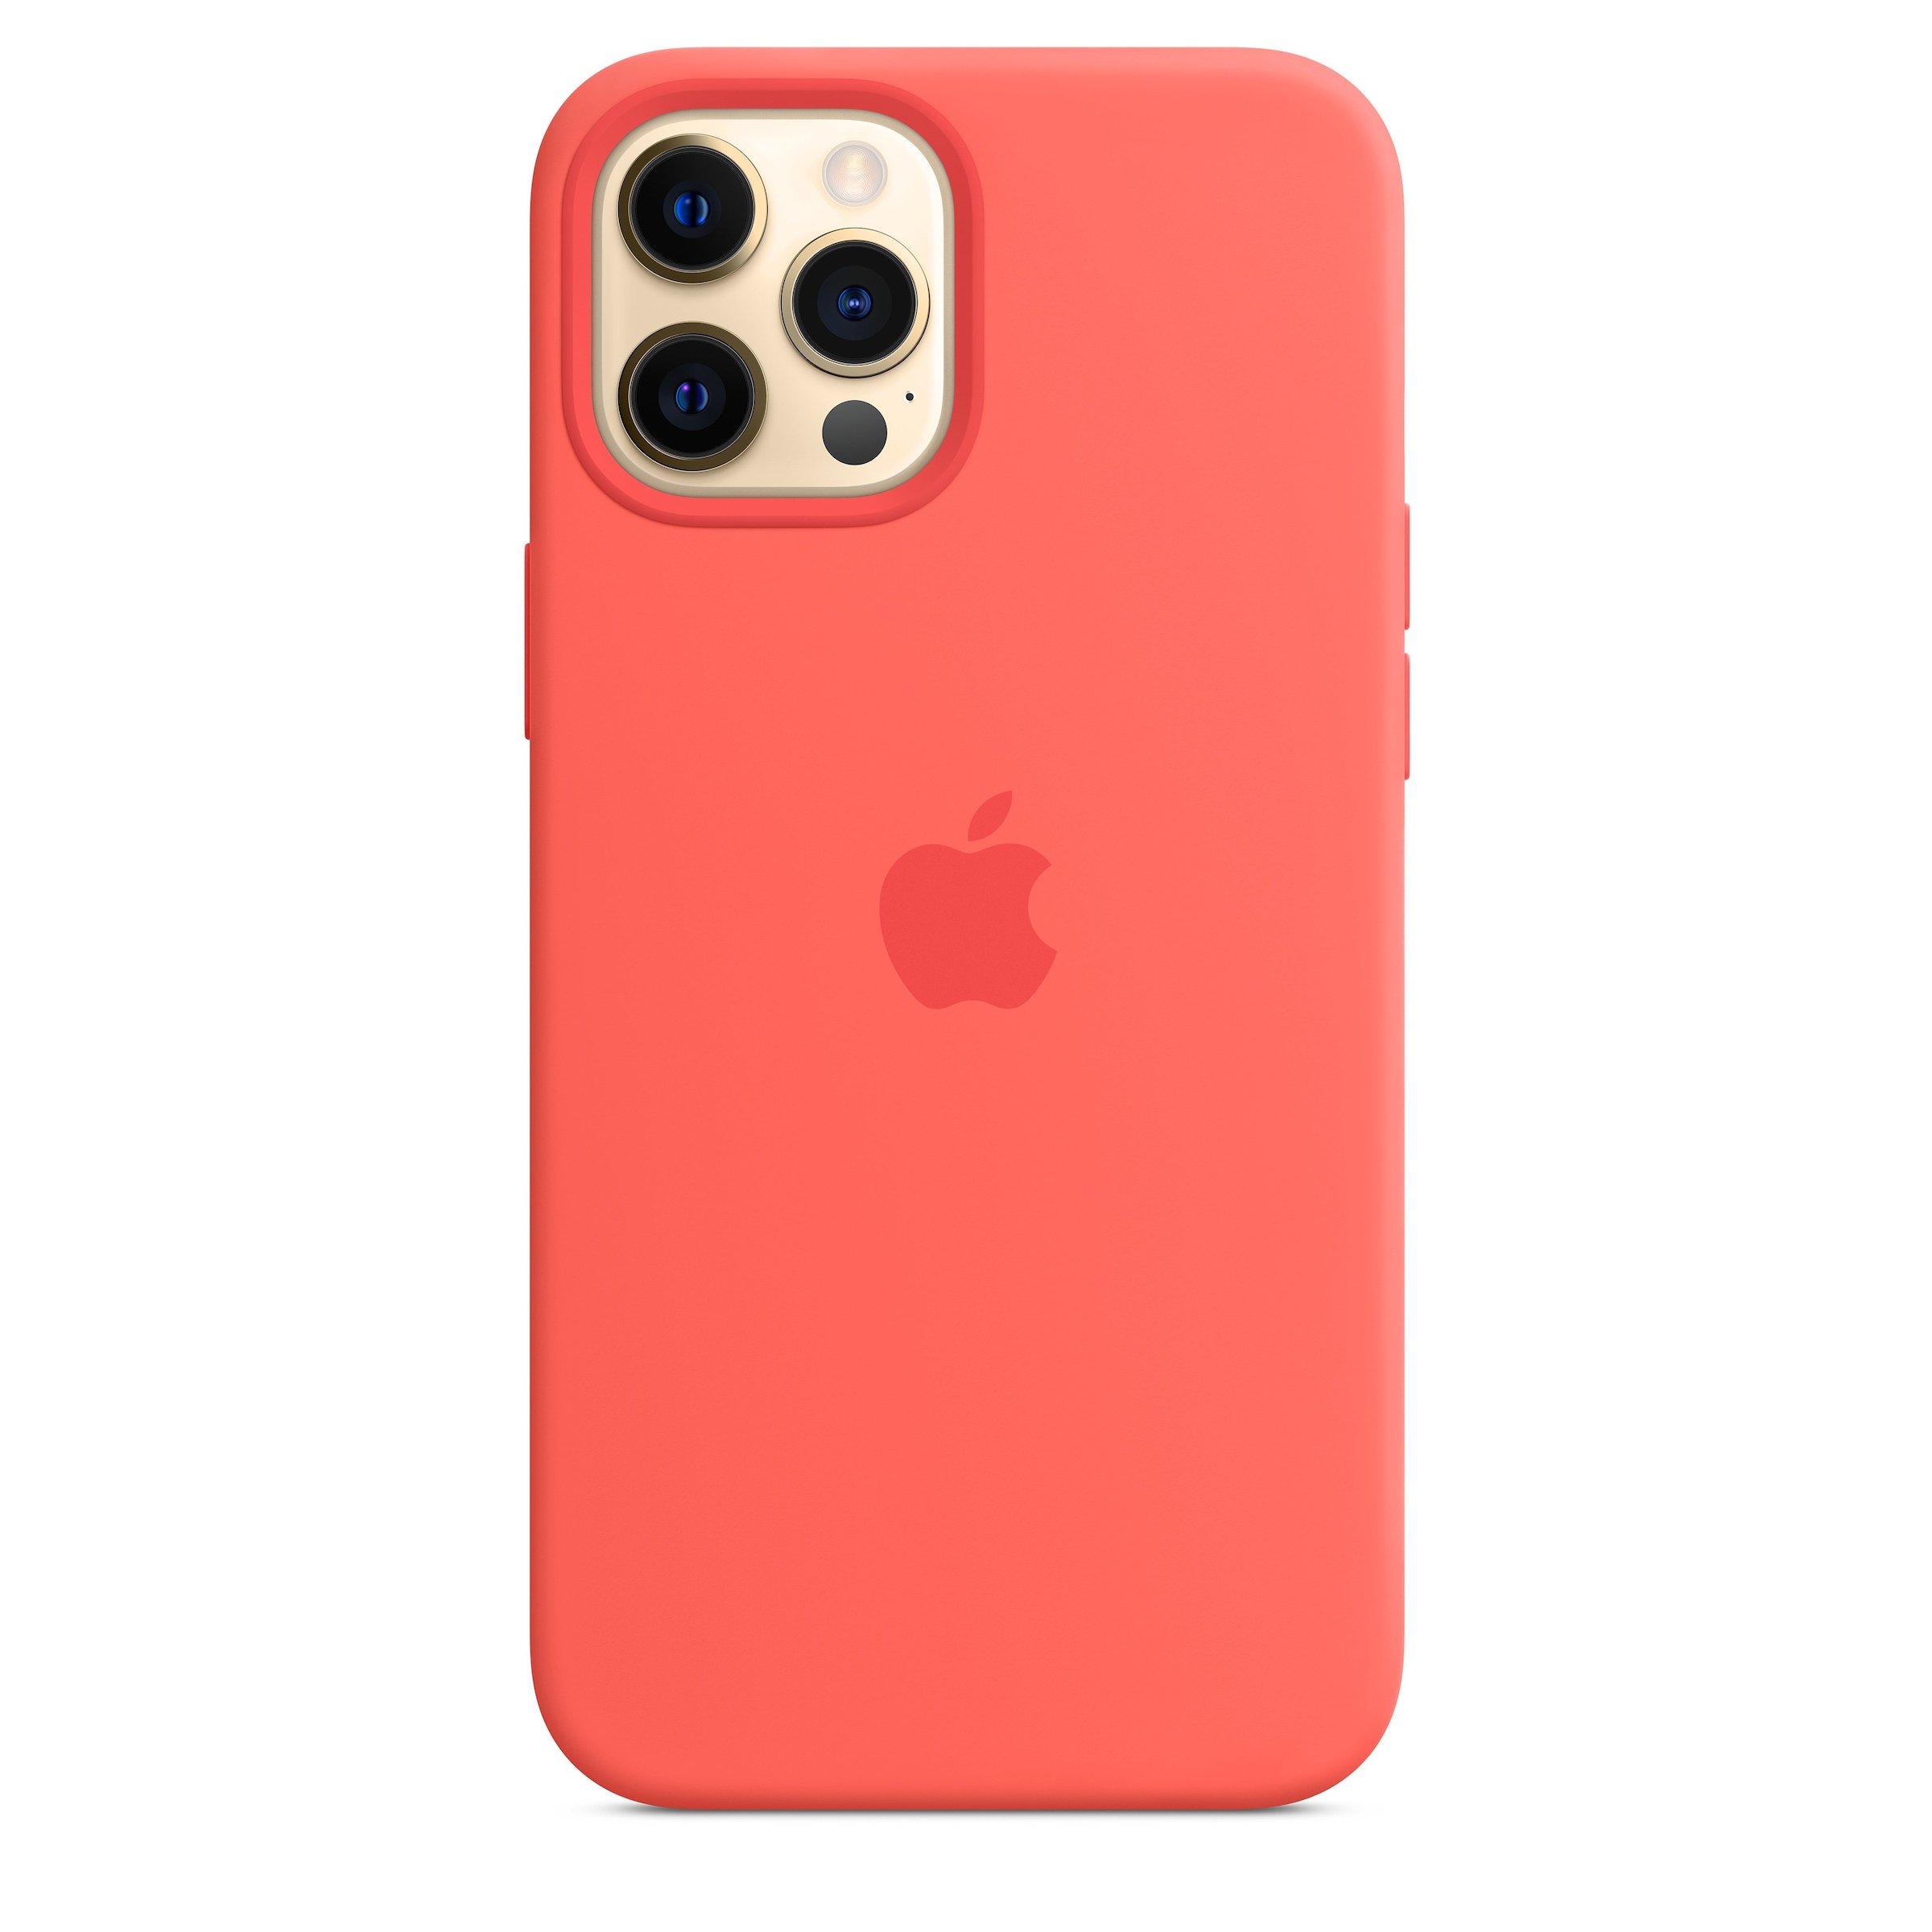 Apple Smartphone-Hülle »iPhone 12 Pro Max Silicone Case«, iPhone 12 Pro Max